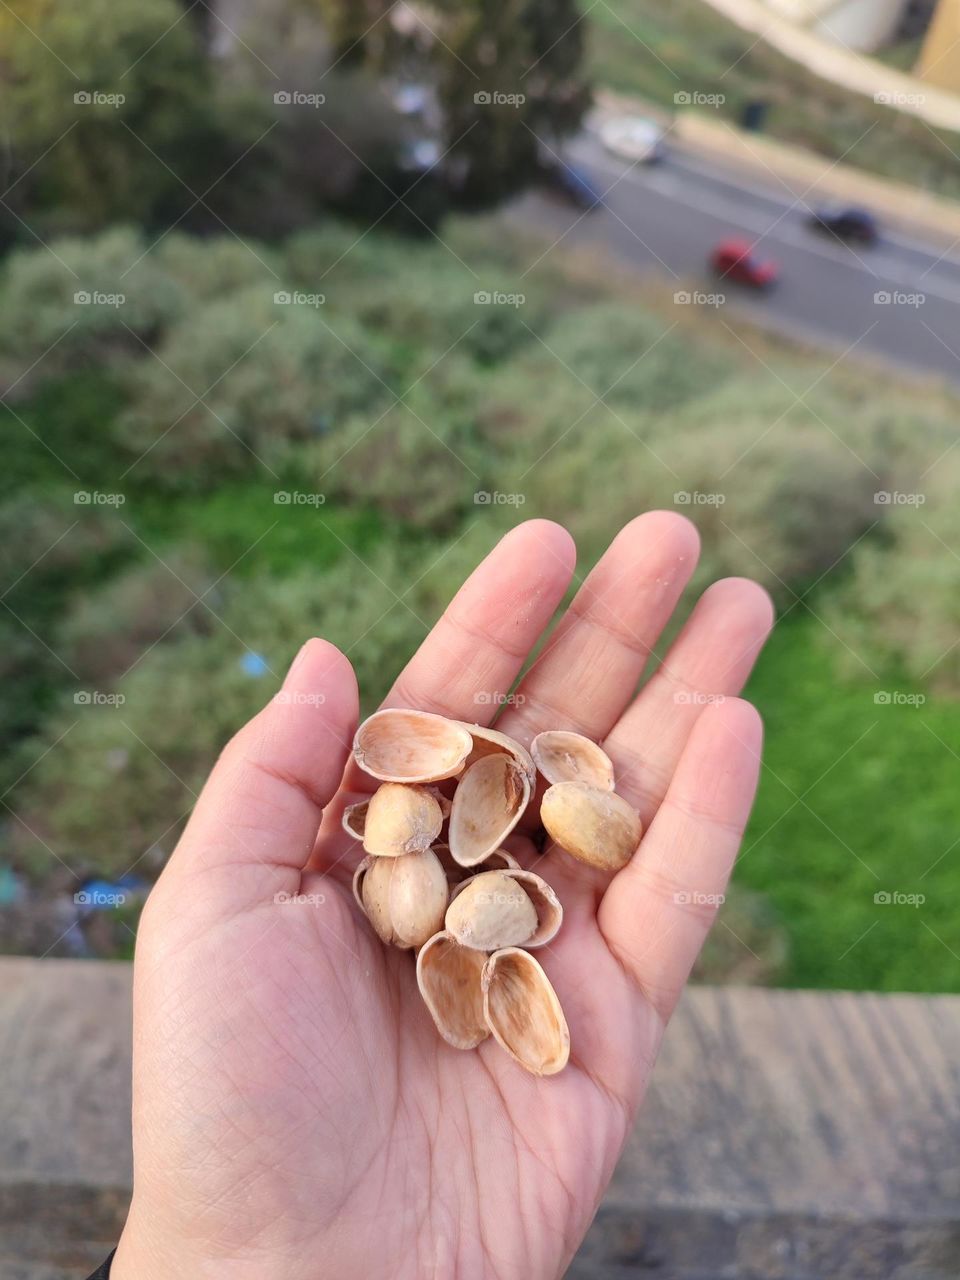 keeping the envirement clean,by  throwing pistachio shells (leftovers) in the designated places